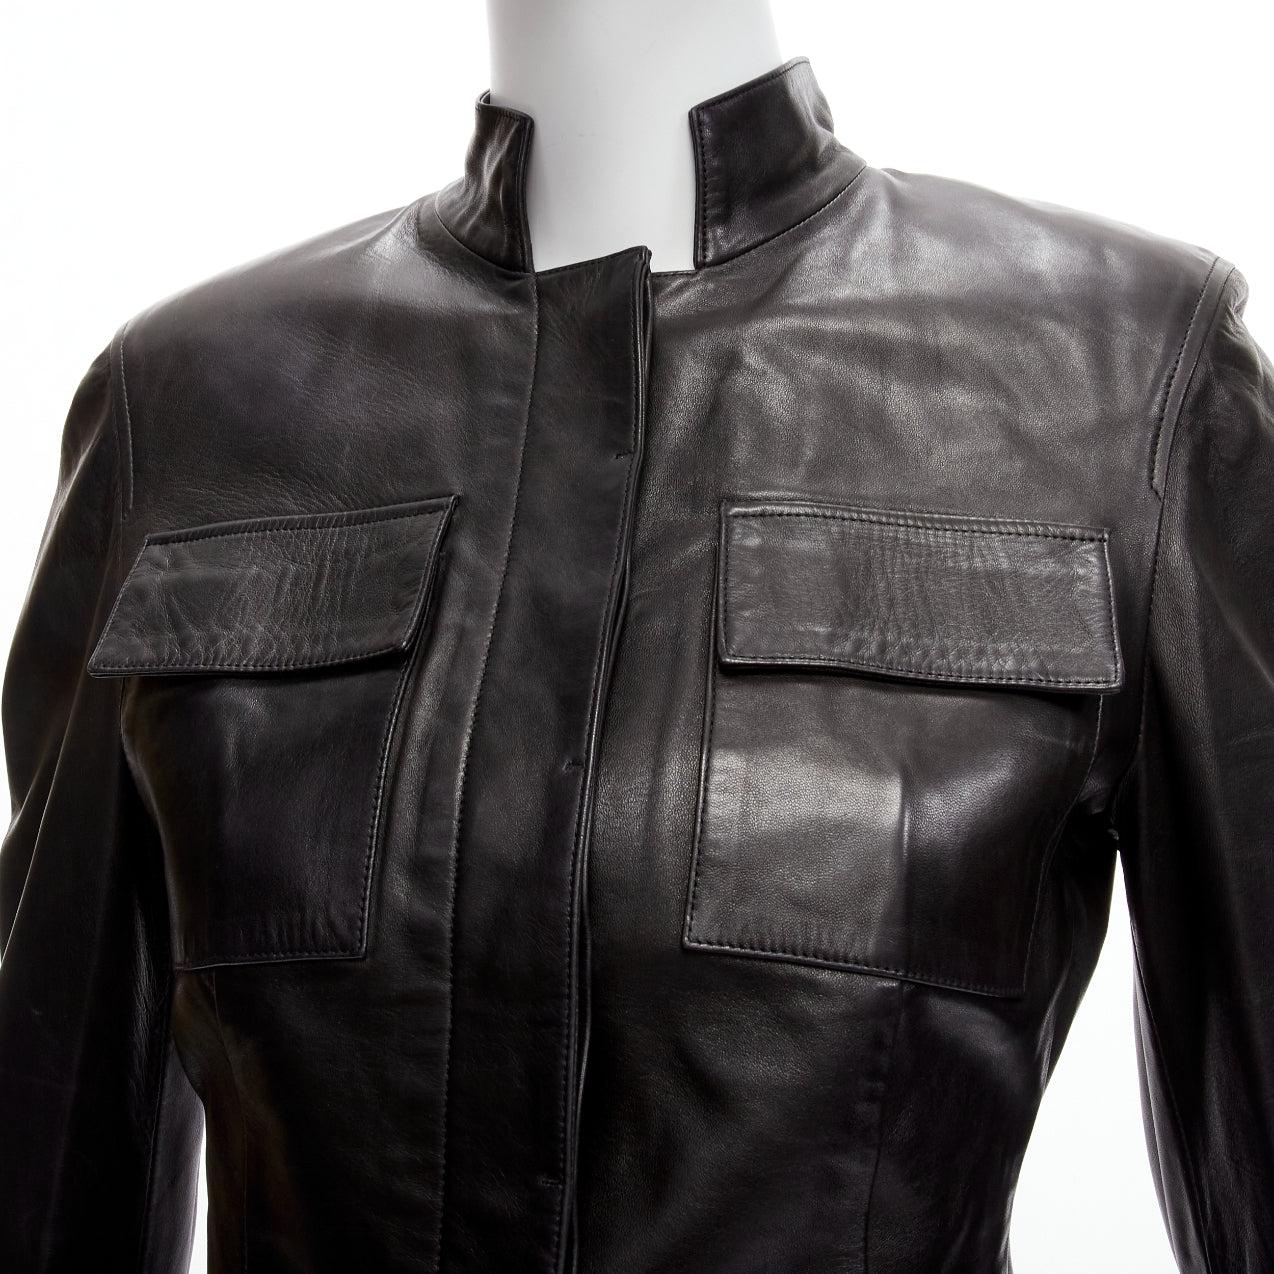 GUCCI Tom Ford Vintage black soft leather utility flap pockets fitted jacket IT38 XS
Reference: PYCN/A00096
Brand: Gucci
Designer: Tom Ford
Material: Leather
Color: Black
Pattern: Solid
Closure: Button
Lining: Black Silk
Extra Details: Shoulder